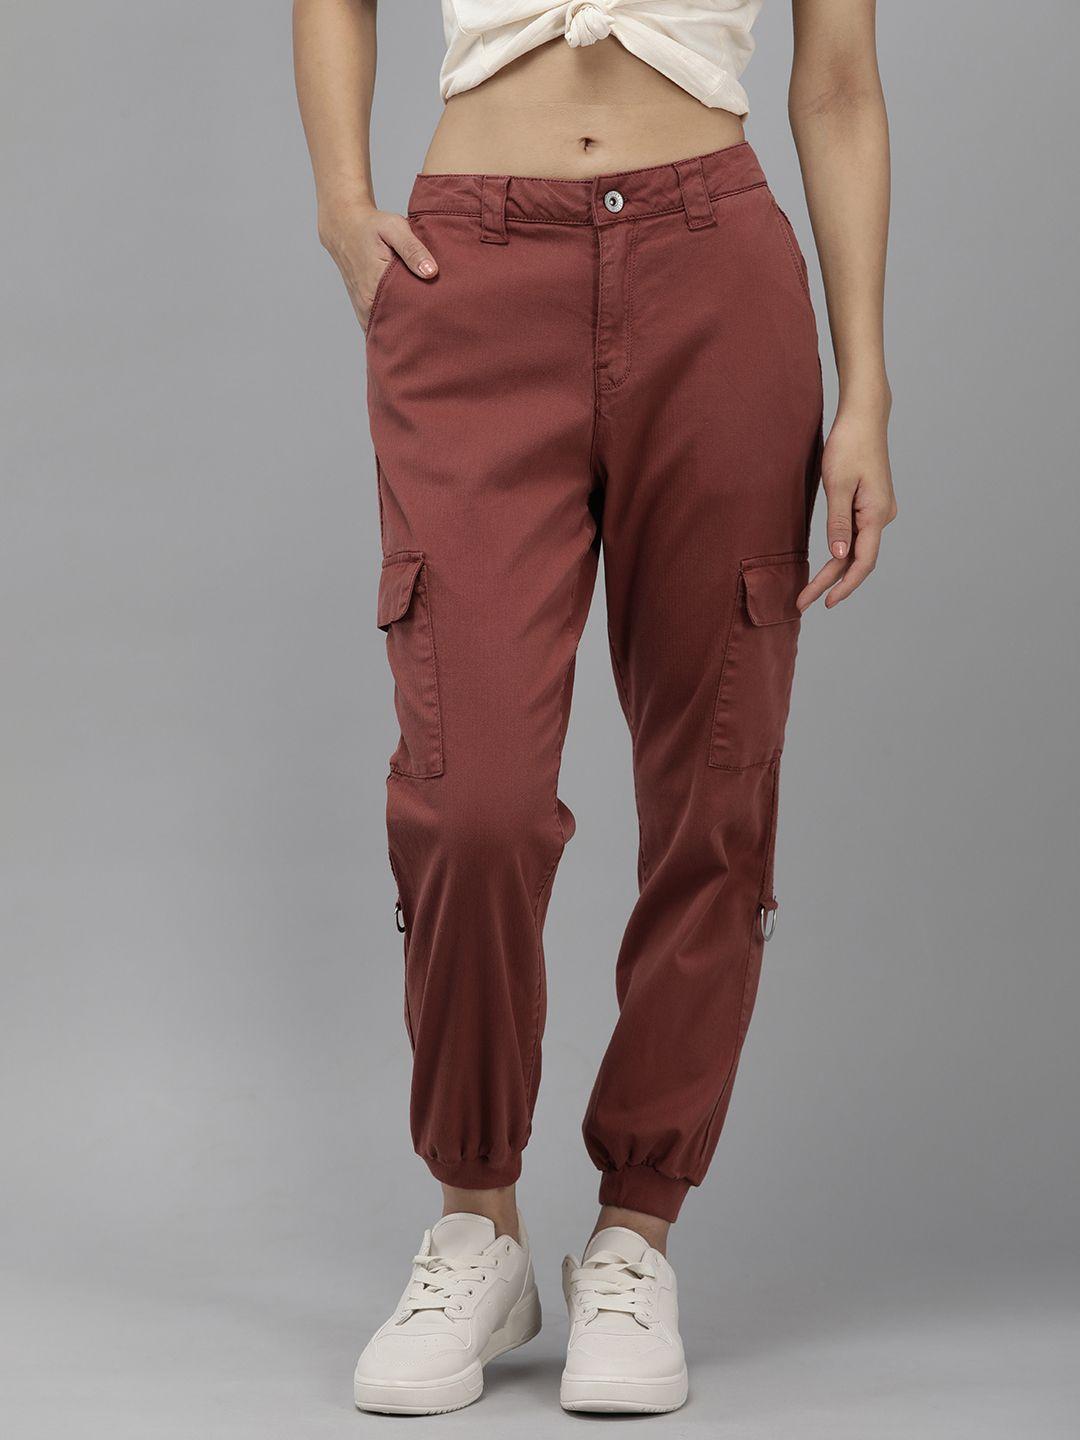 the roaster lifestyle co. women mid rise flat front joggers